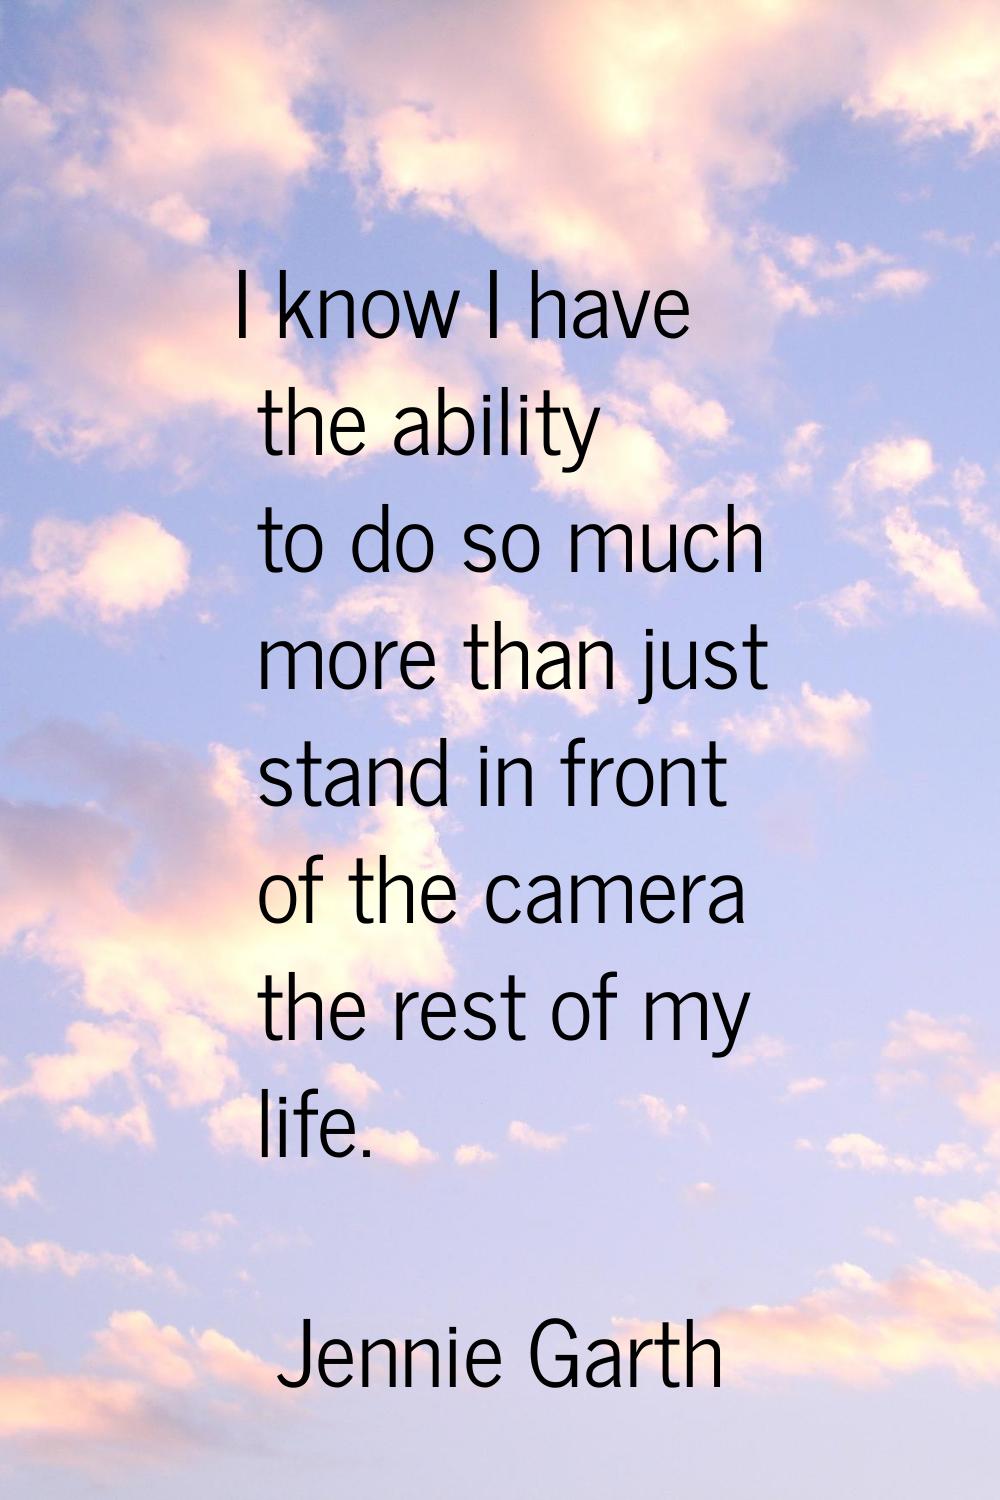 I know I have the ability to do so much more than just stand in front of the camera the rest of my 